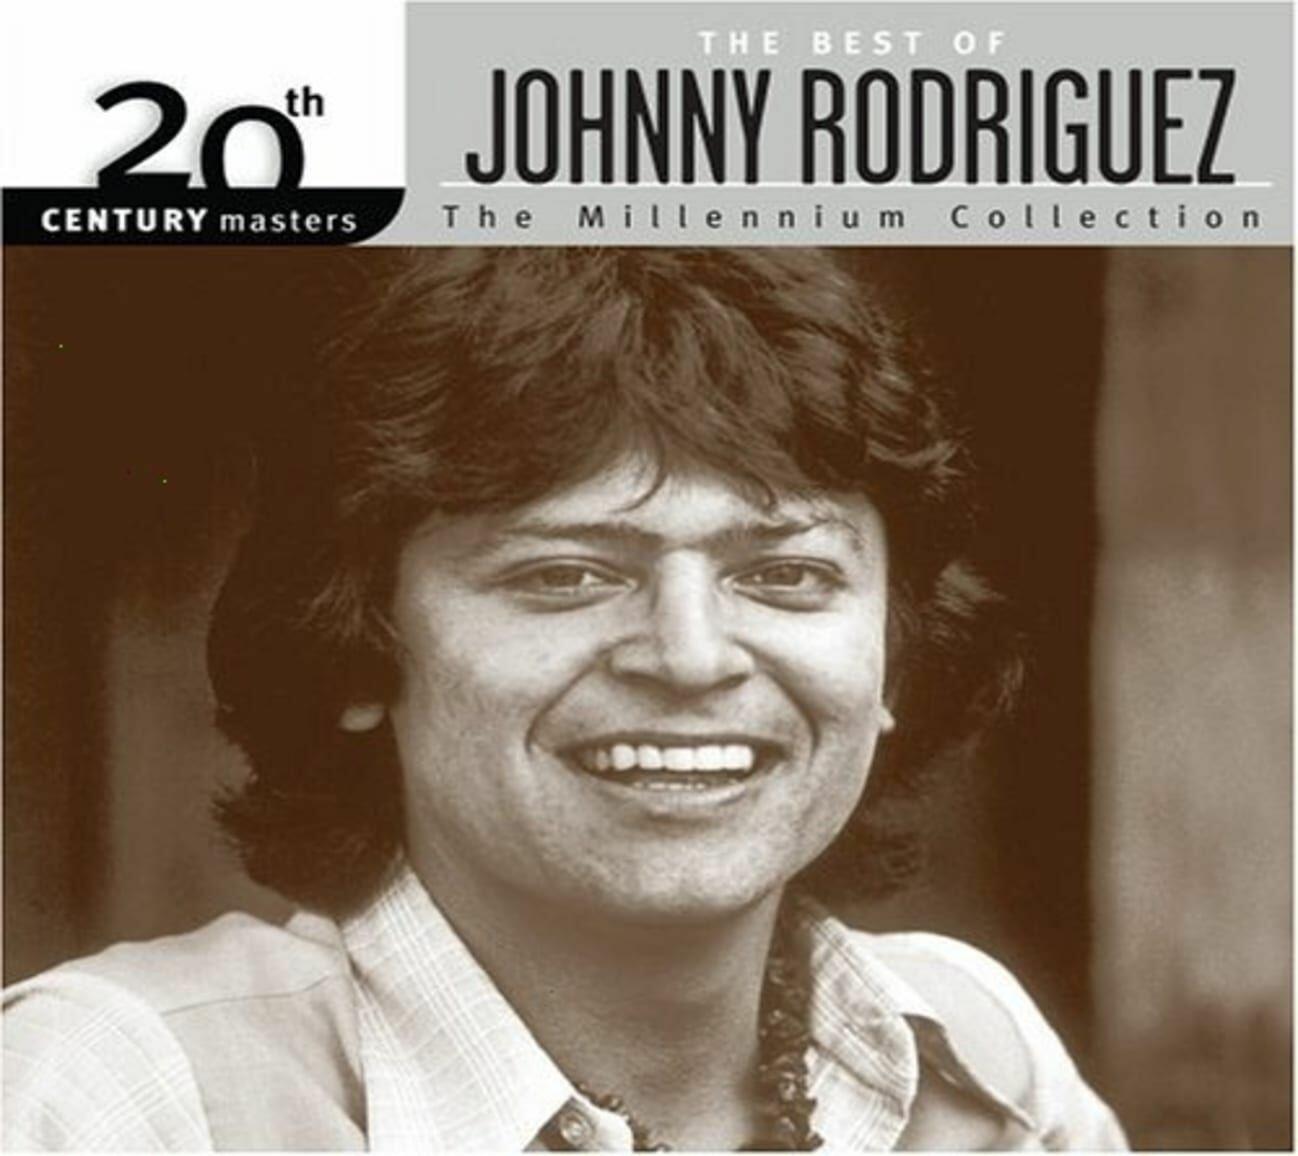 The Best of Johnny Rodrigues (CD) on MovieShack